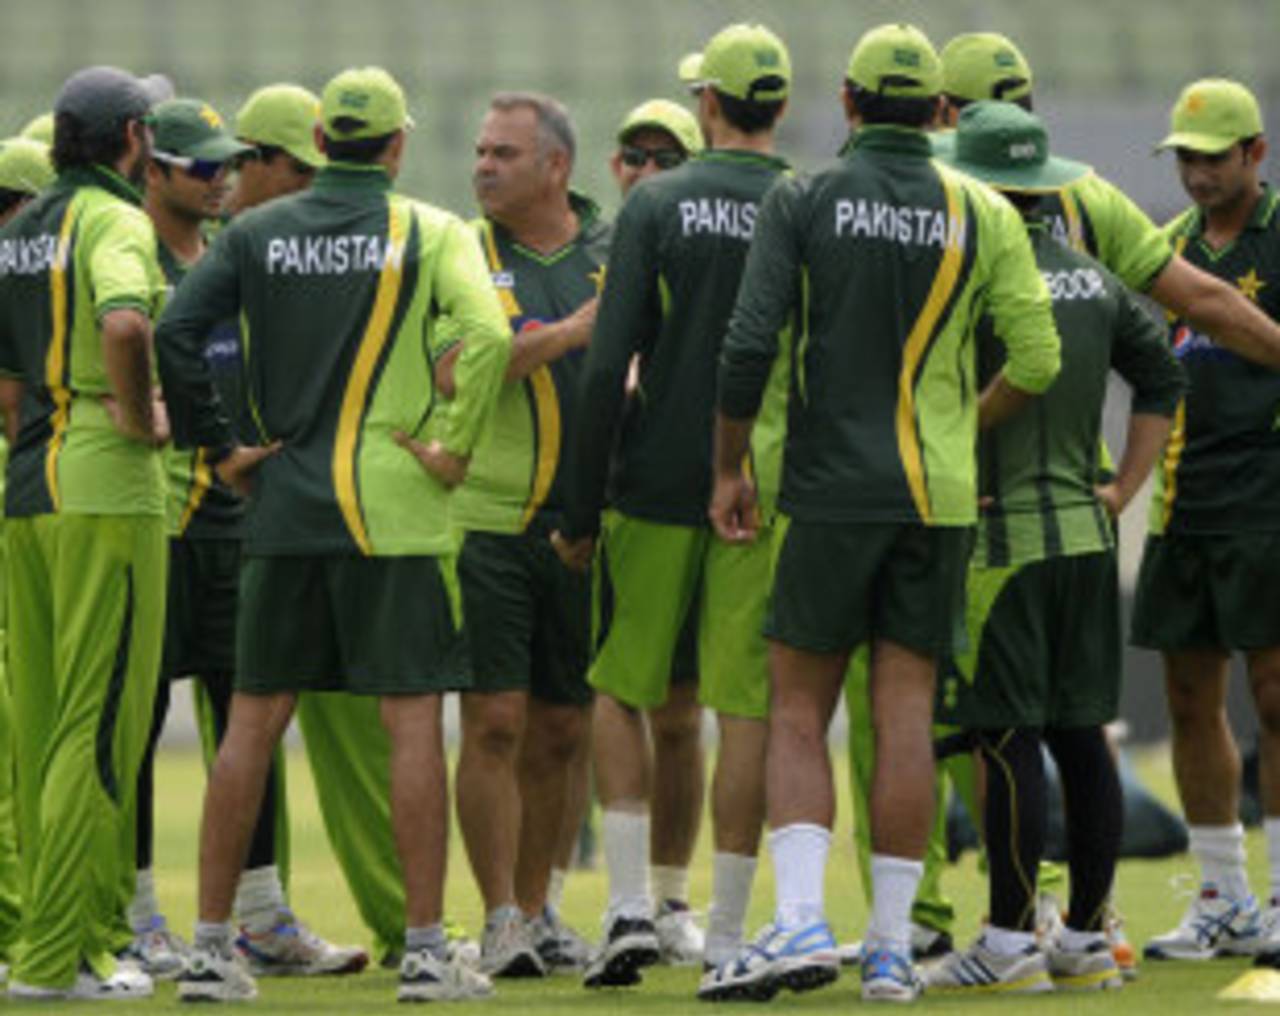 Pakistan coach Dav Whatmore has a chat with his players, Mirpur, March 10, 2012